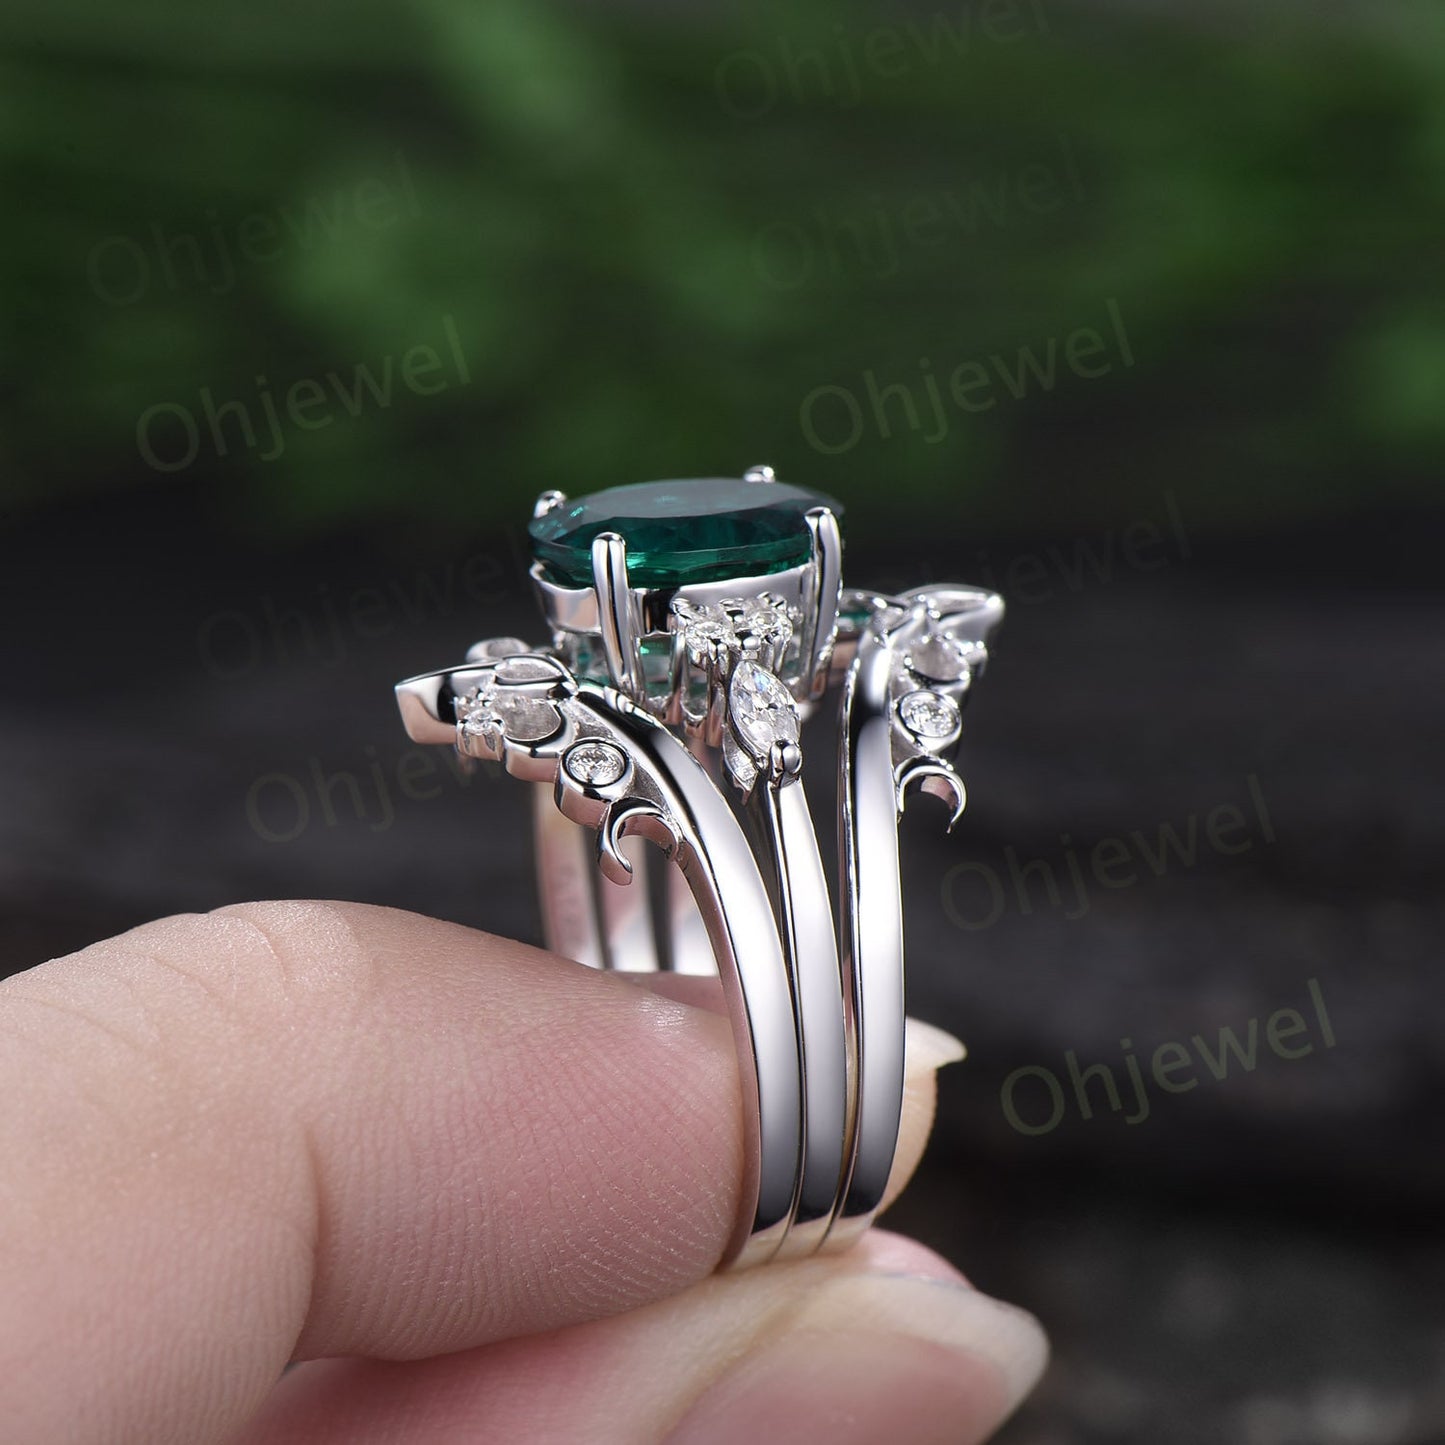 8x10mm oval cut Emerald engagement ring set solid 14k white gold Celtic knot diamond ring vintage fine jewelry stacking bridal set women